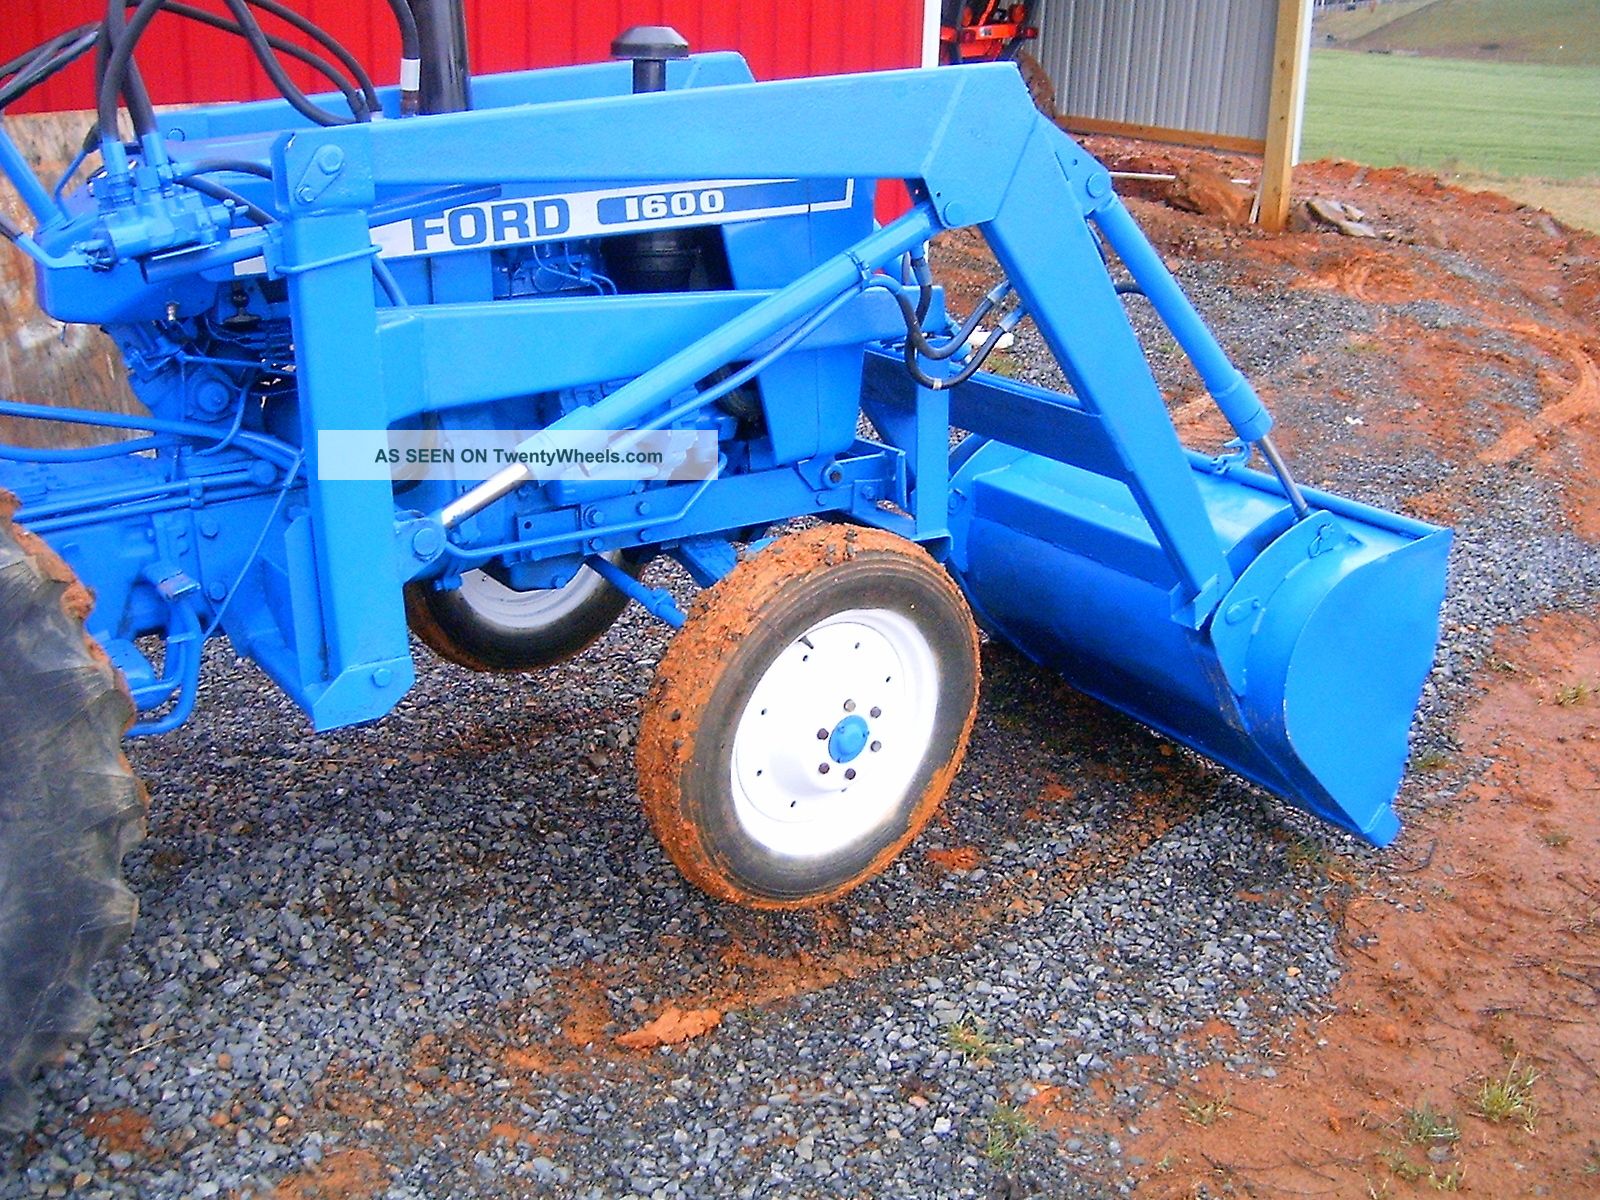 Bucket loader for ford 1600 tractor